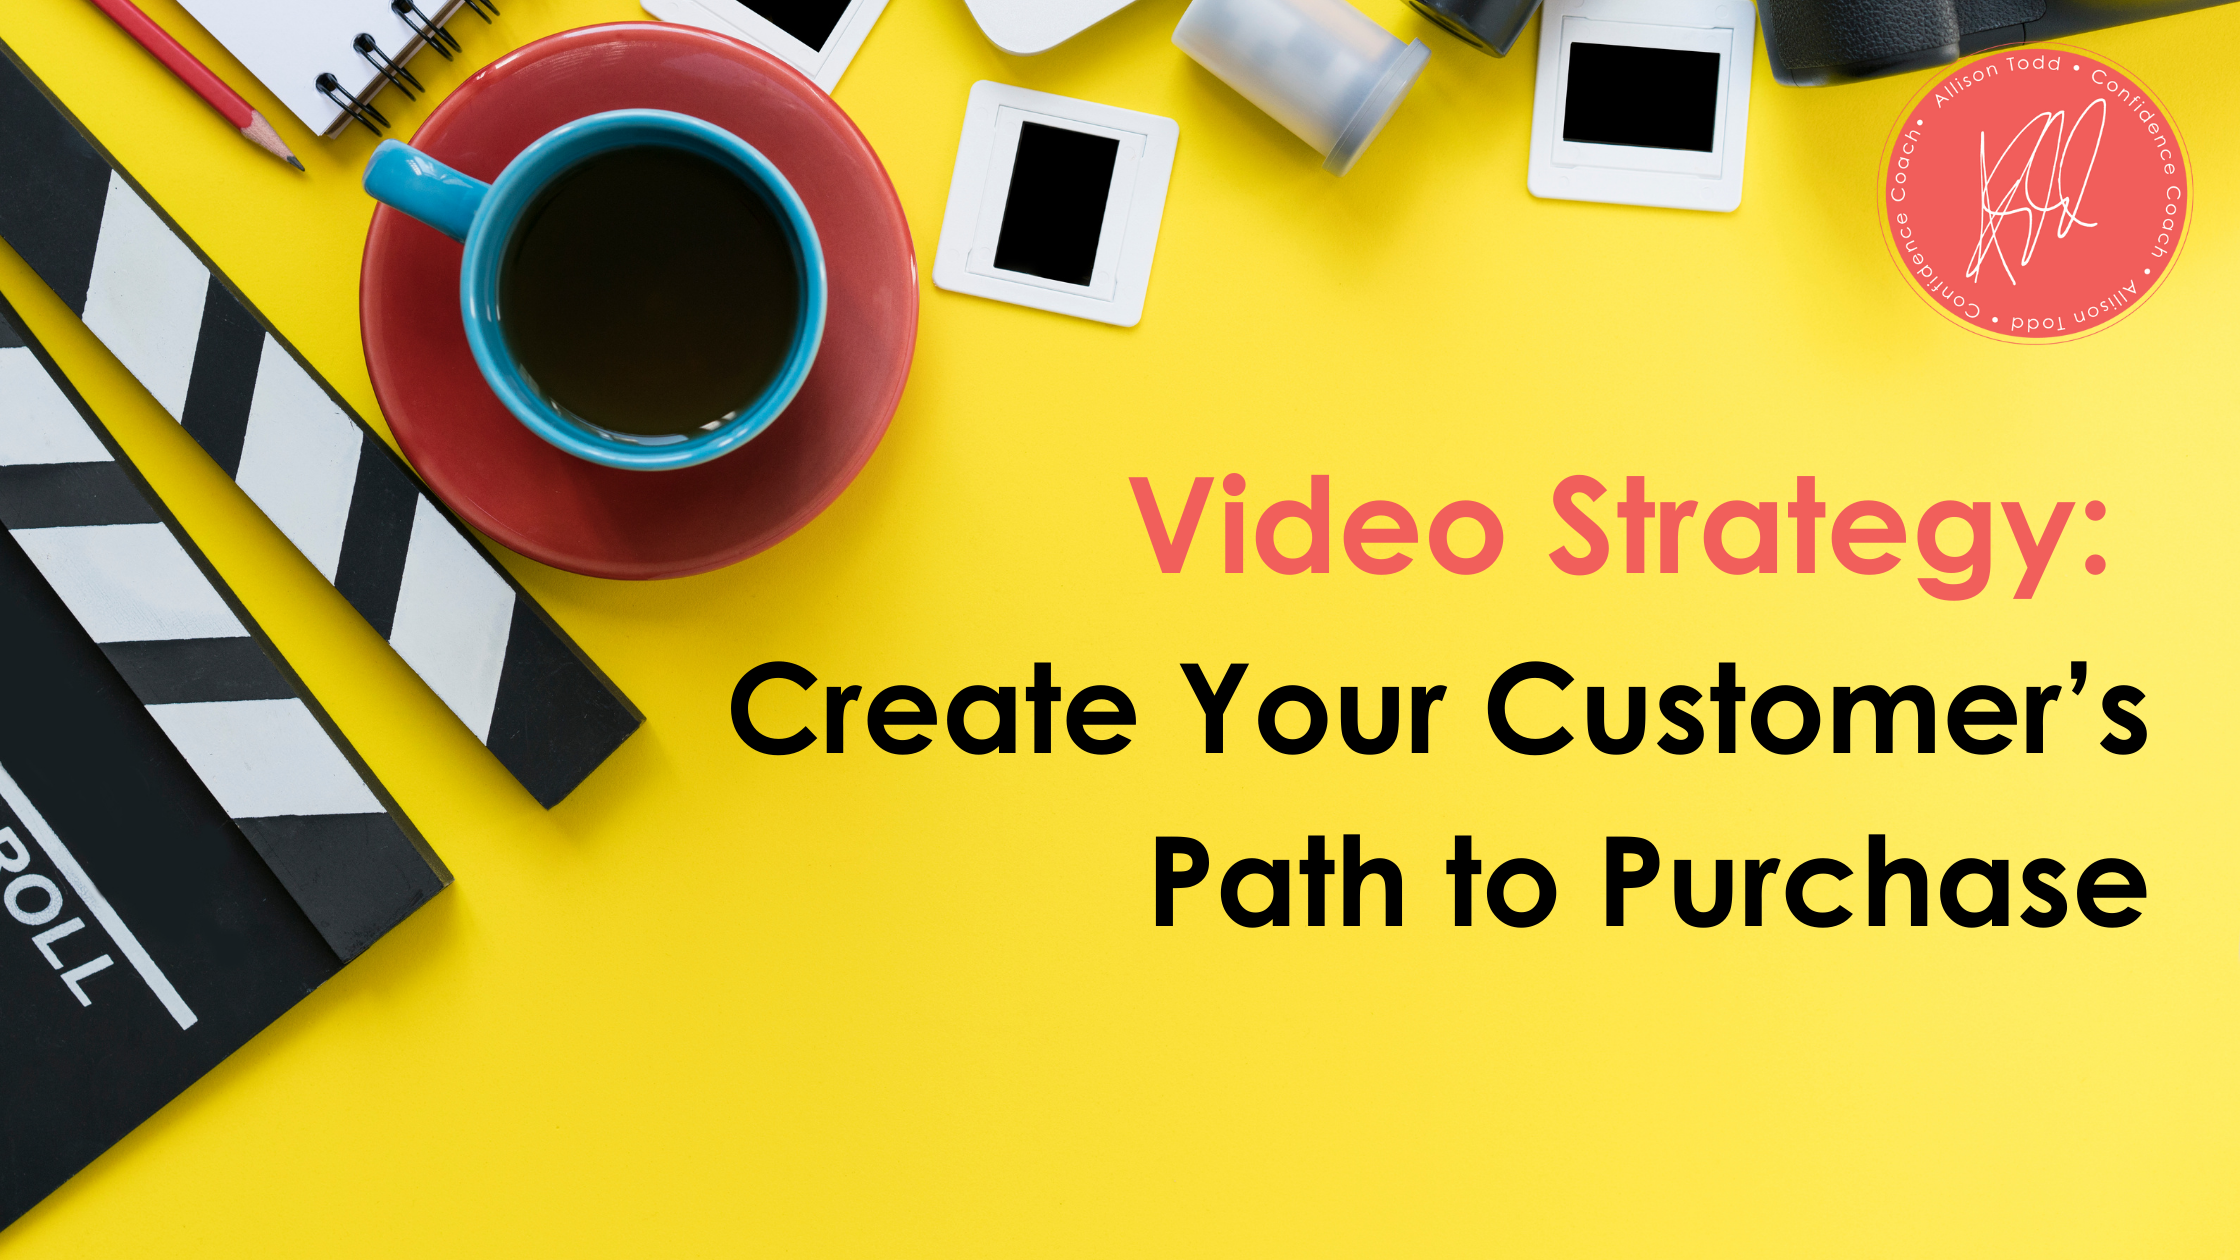 Video Strategy: Create Your Customer’s Path to Purchase